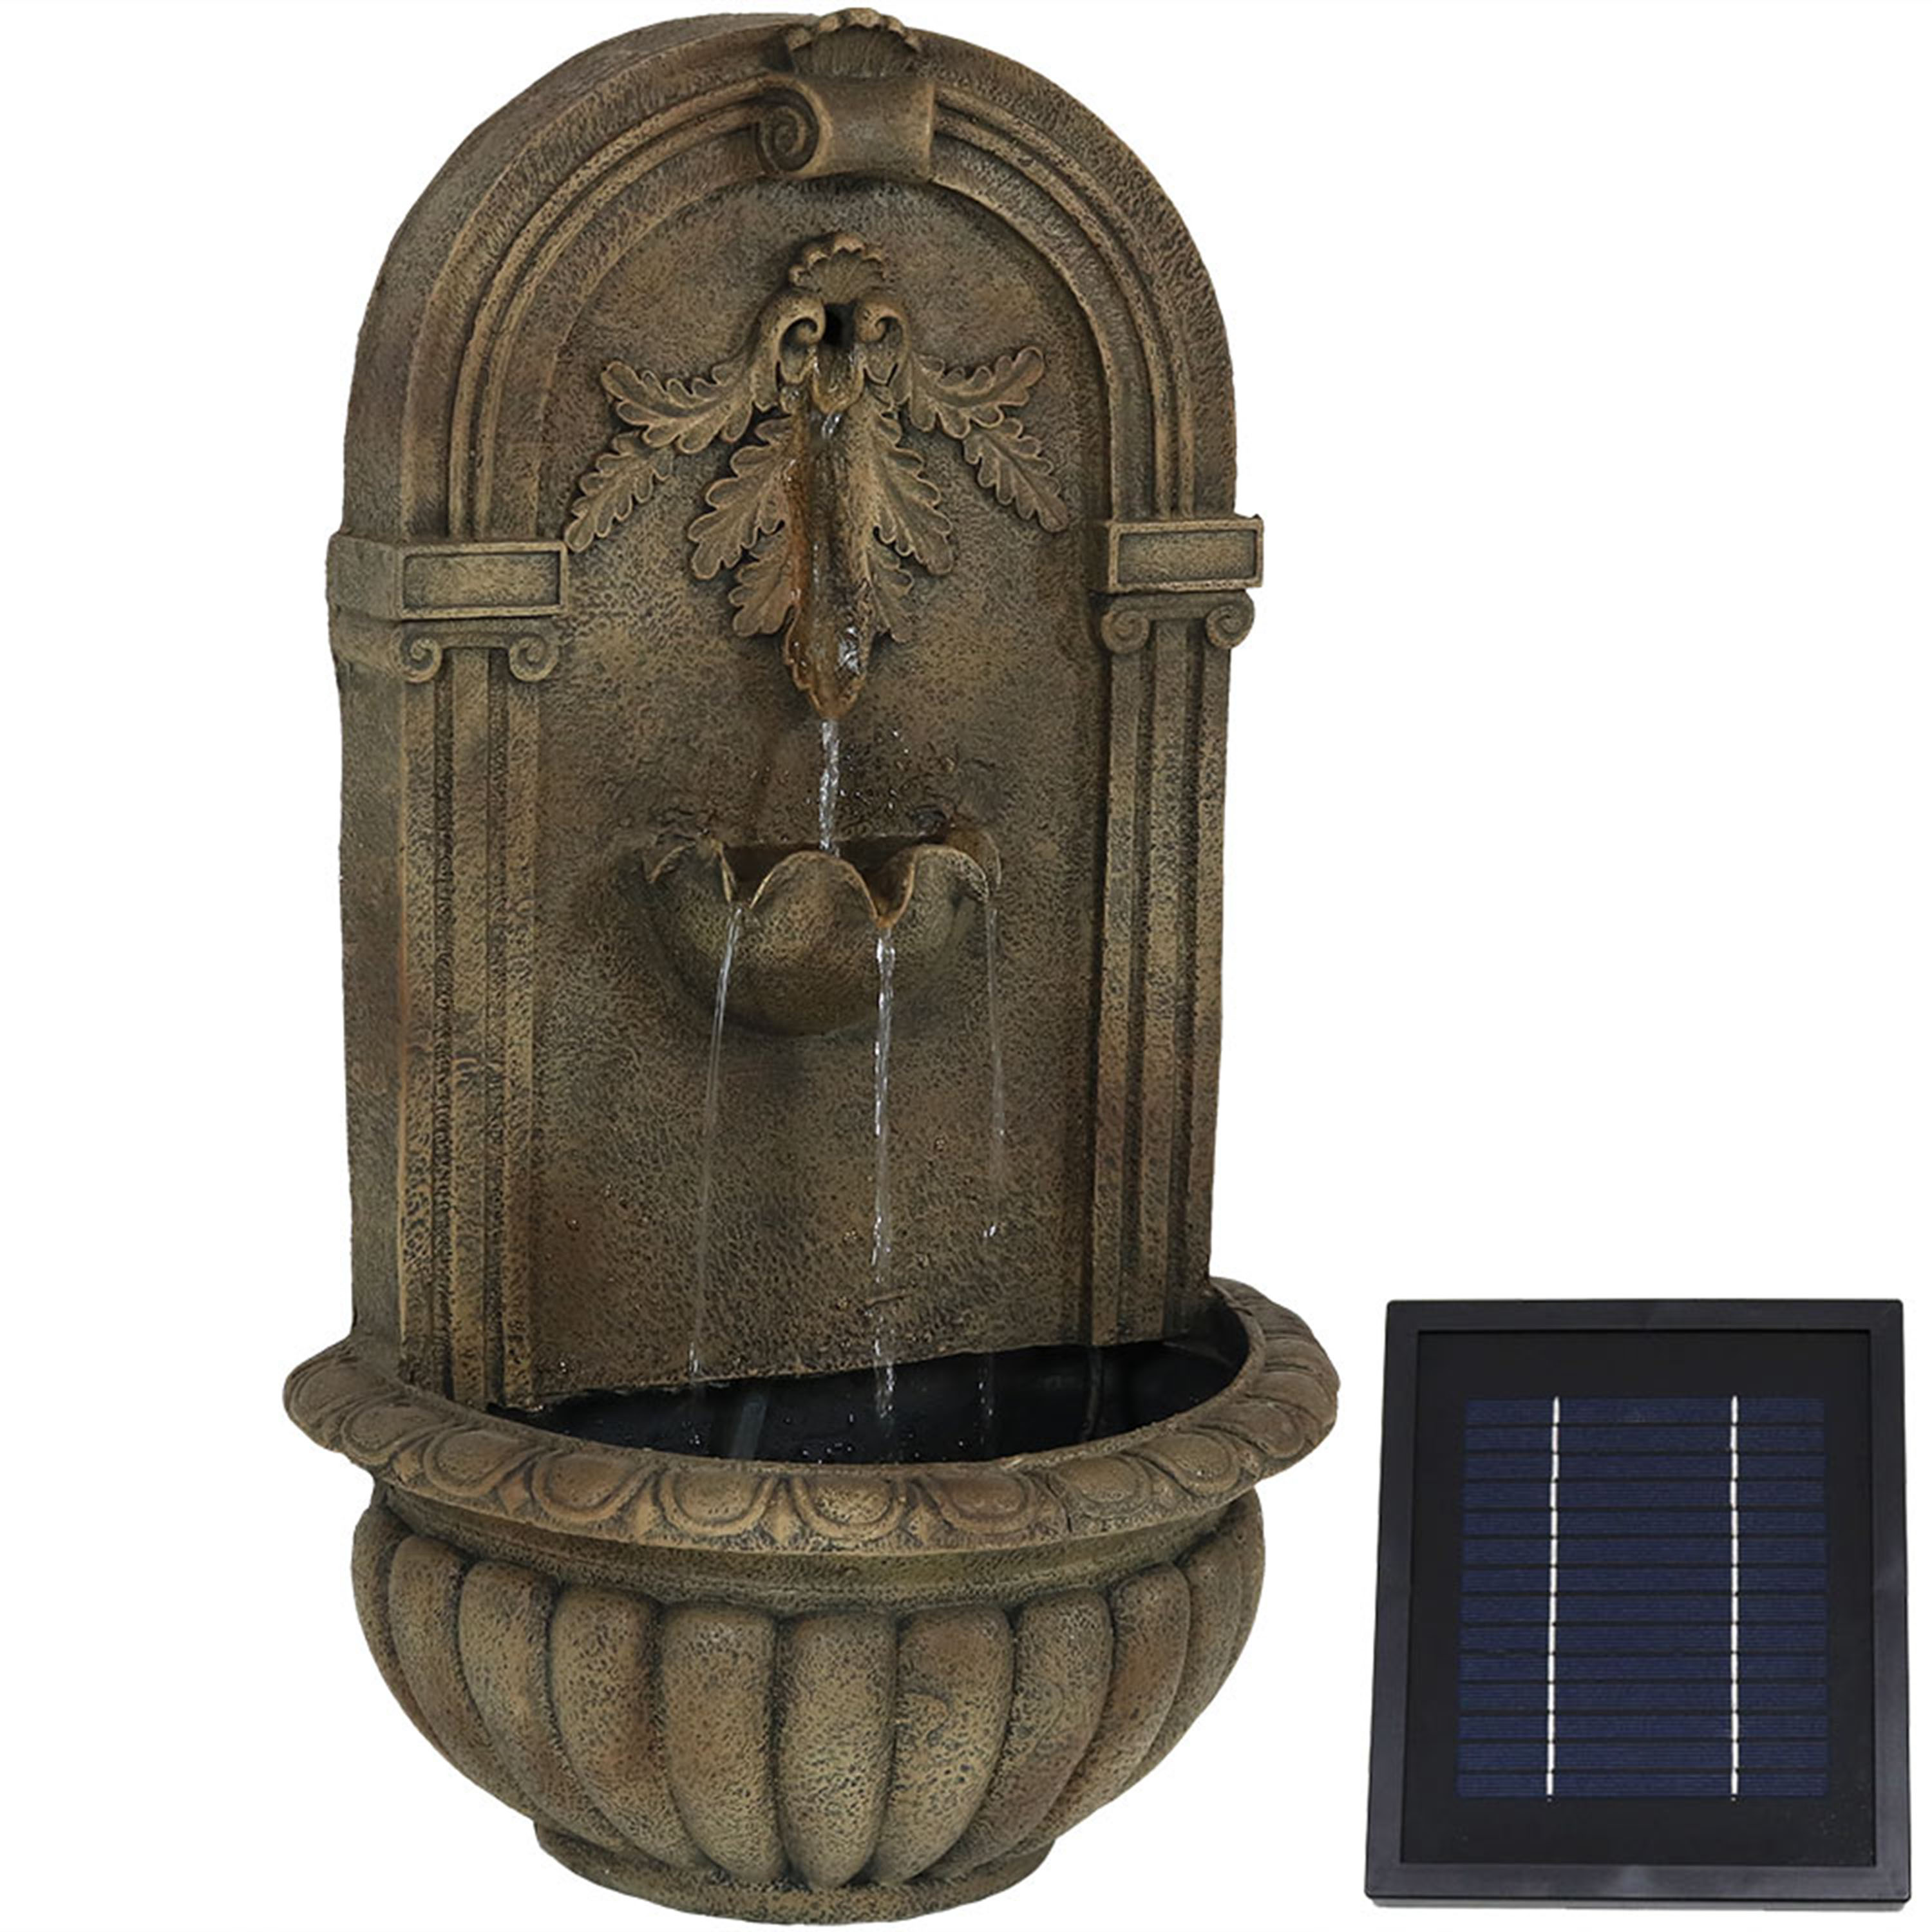 Sunnydaze Florence Solar Garden Outdoor Wall Fountain with Solar Pump and Panel, Florentine, Solar with Battery Backup Feature